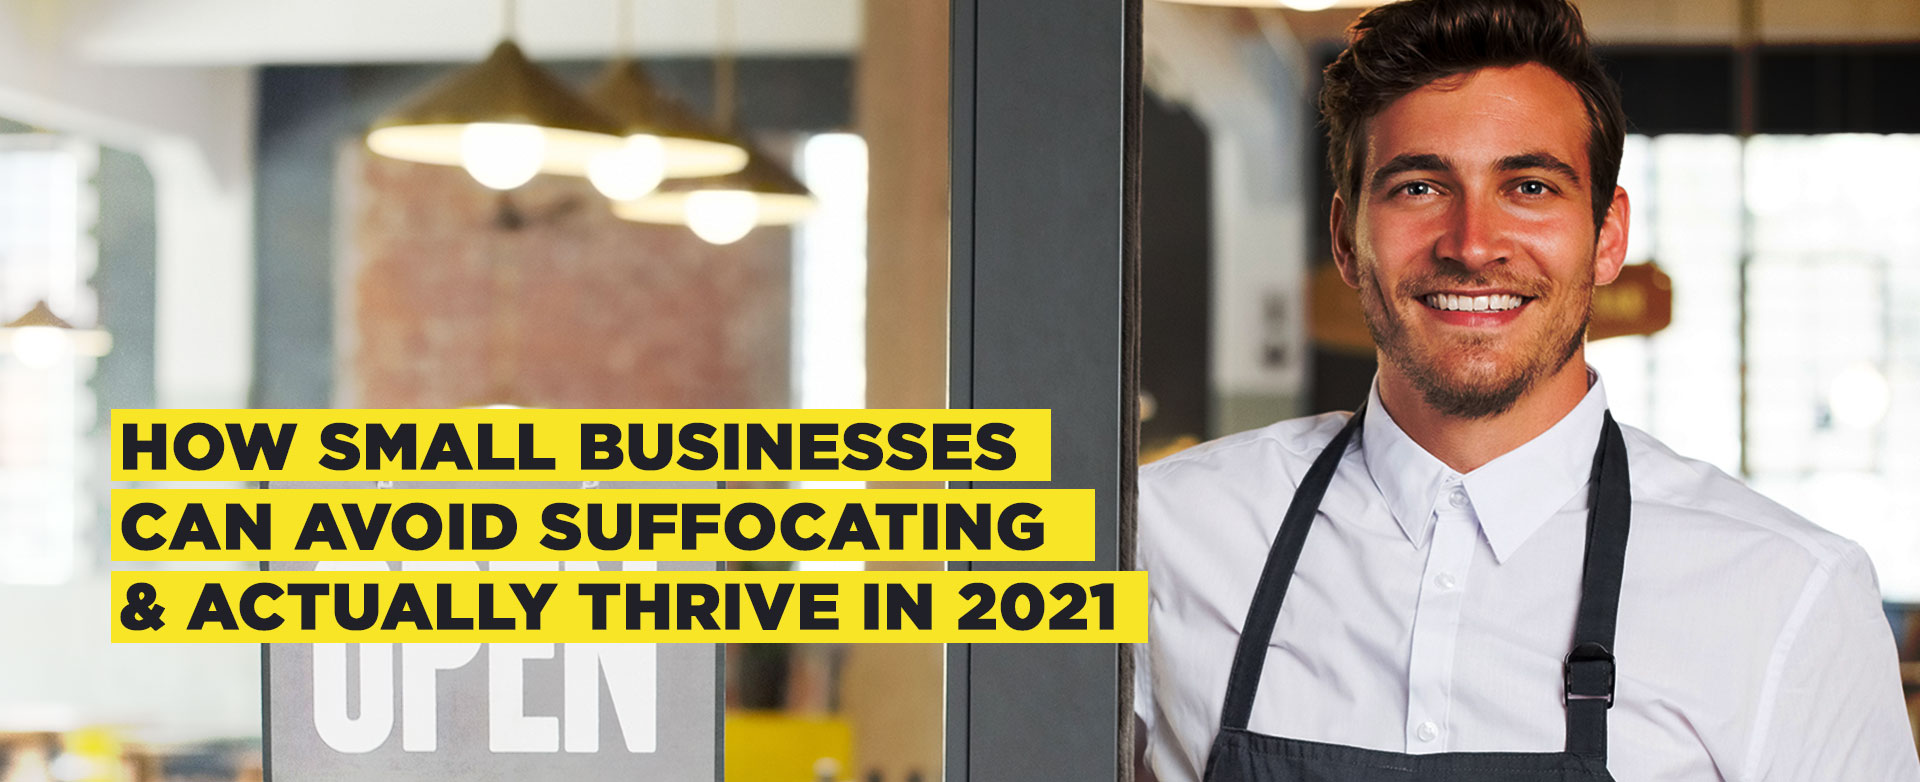 MyPatriotsNetwork-How Small Businesses Can Avoid Suffocating & Actually Thrive In 2021